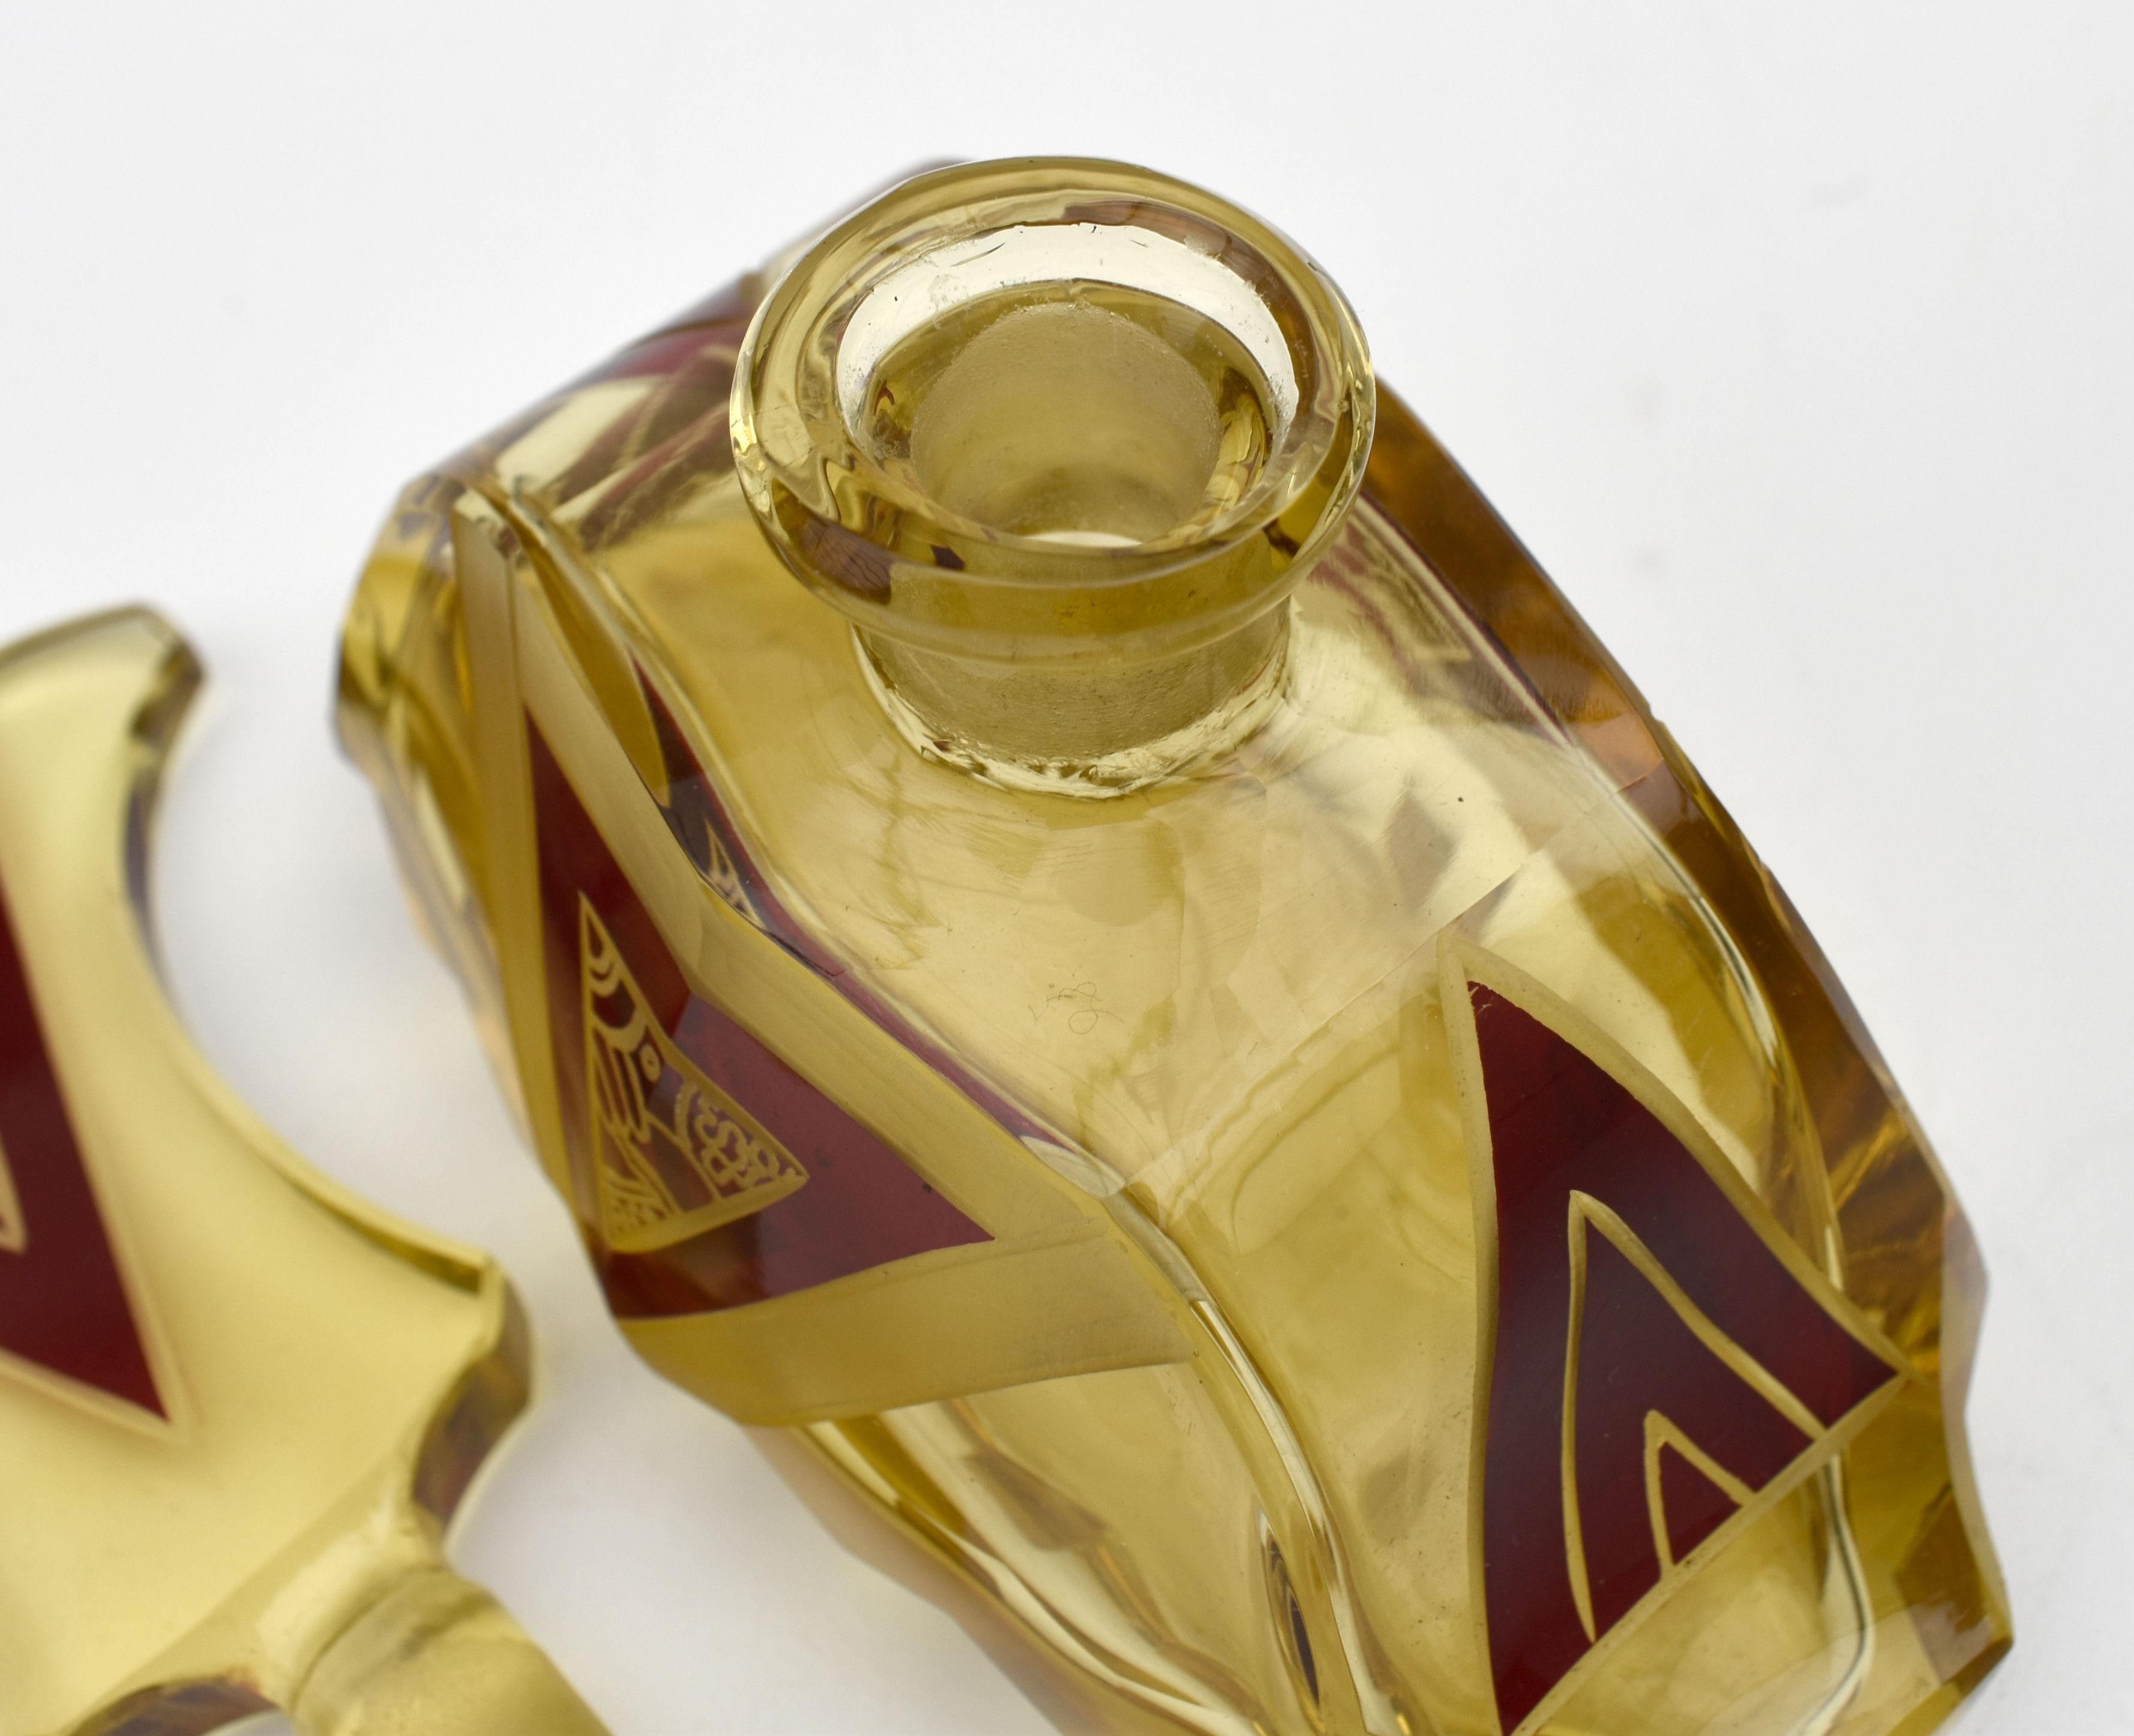 20th Century Art Deco Amber Coloured Glass Perfume Bottle by Karl Palda, c1930s For Sale